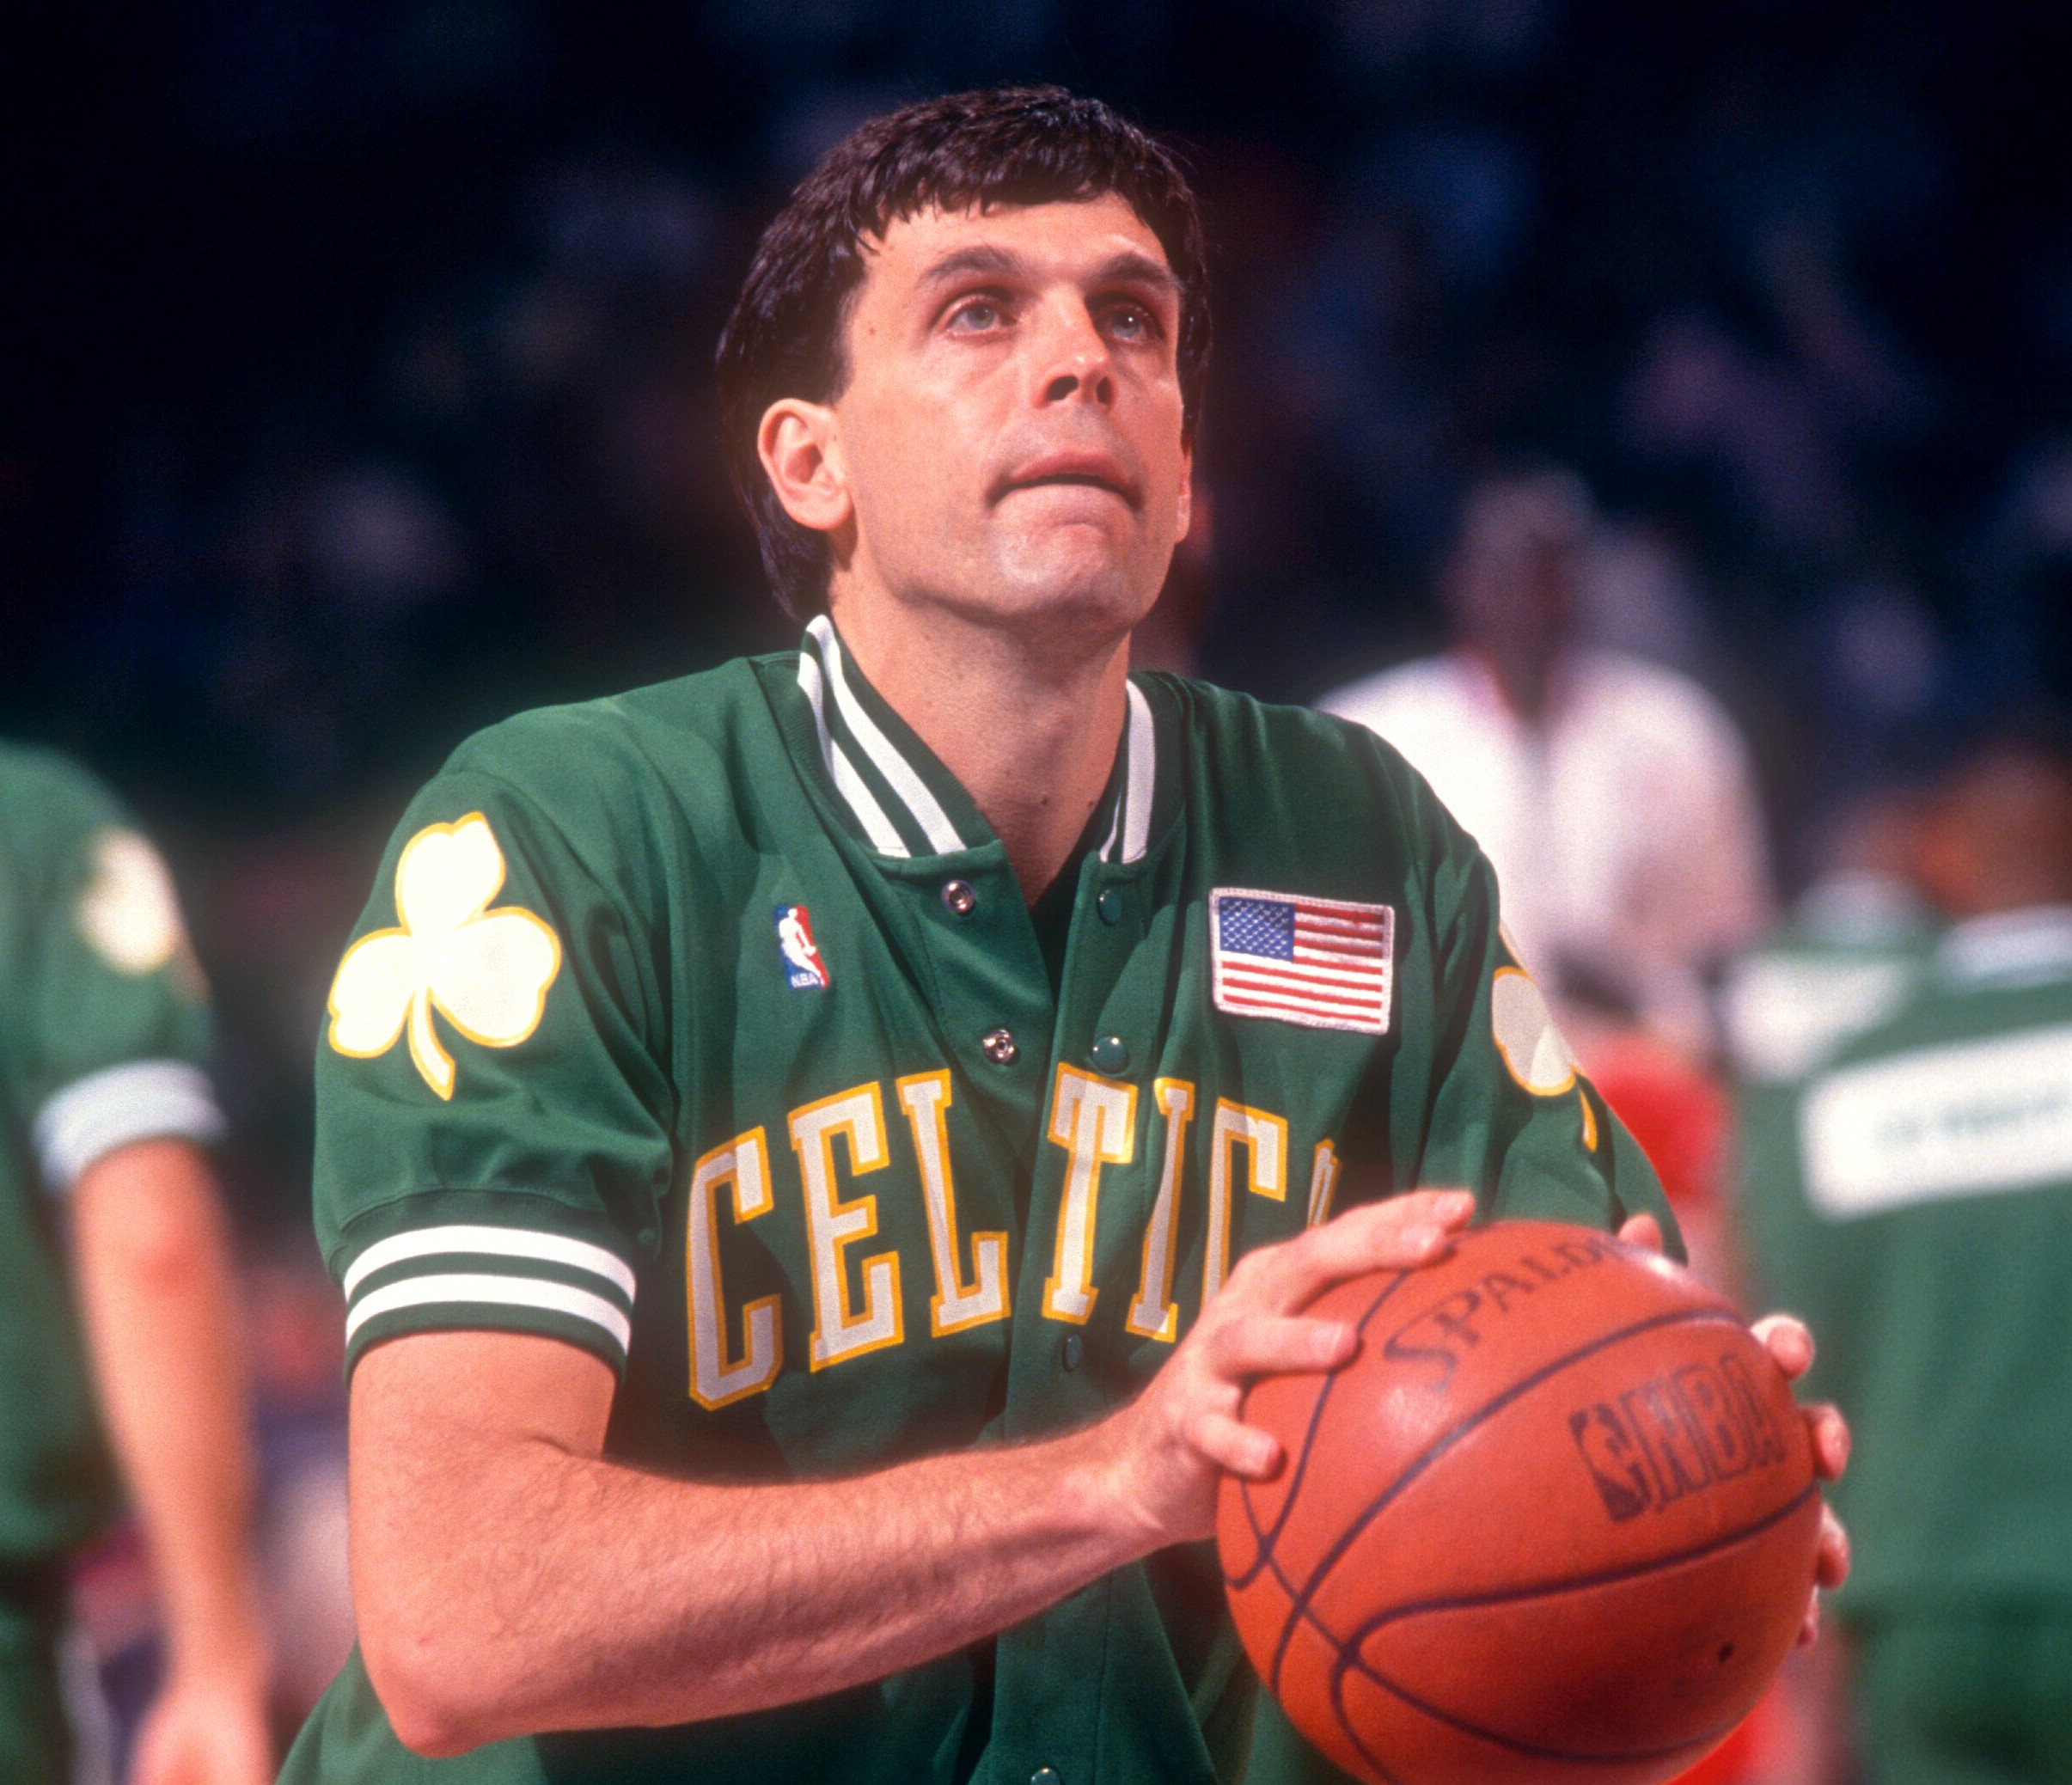 Kevin McHale of the Boston Celtics shoots free throws during warm-ups prior to an NBA game against the Philadelphia 76ers.